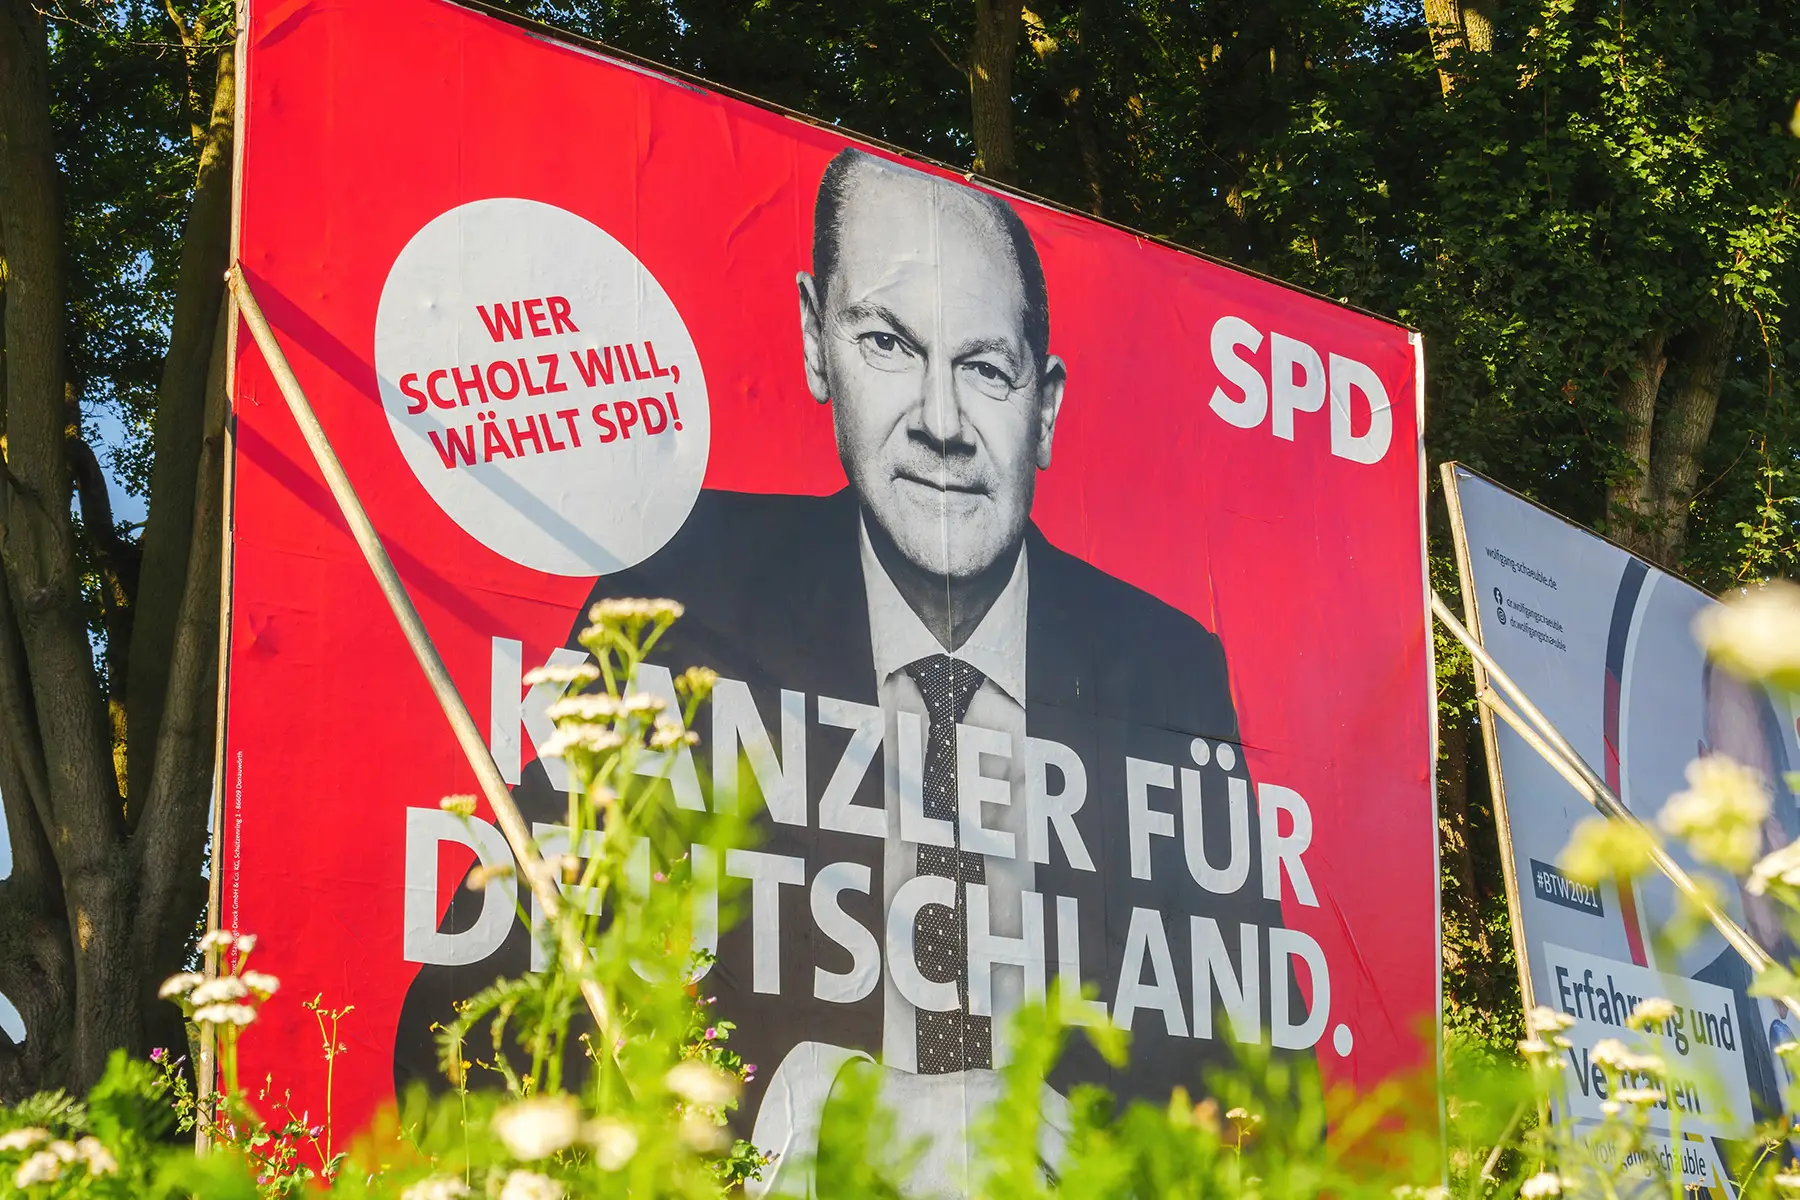 SPD sign during the 2021 German election